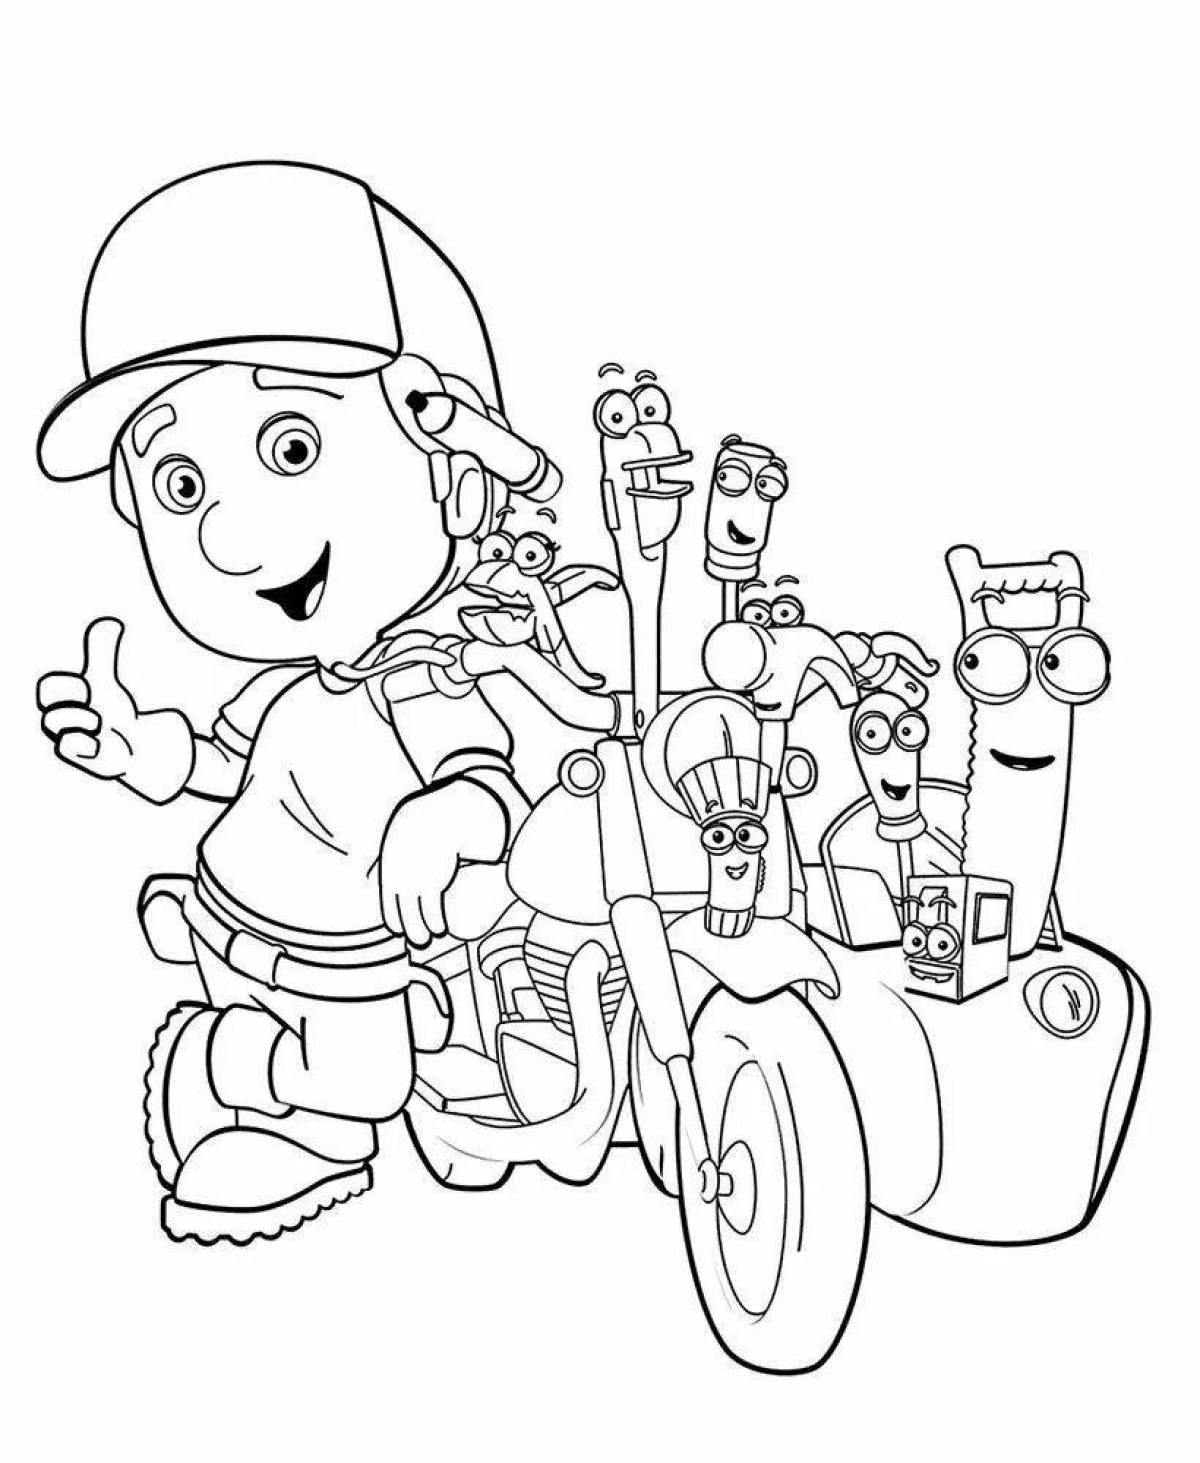 Colorable cog coloring page for kids